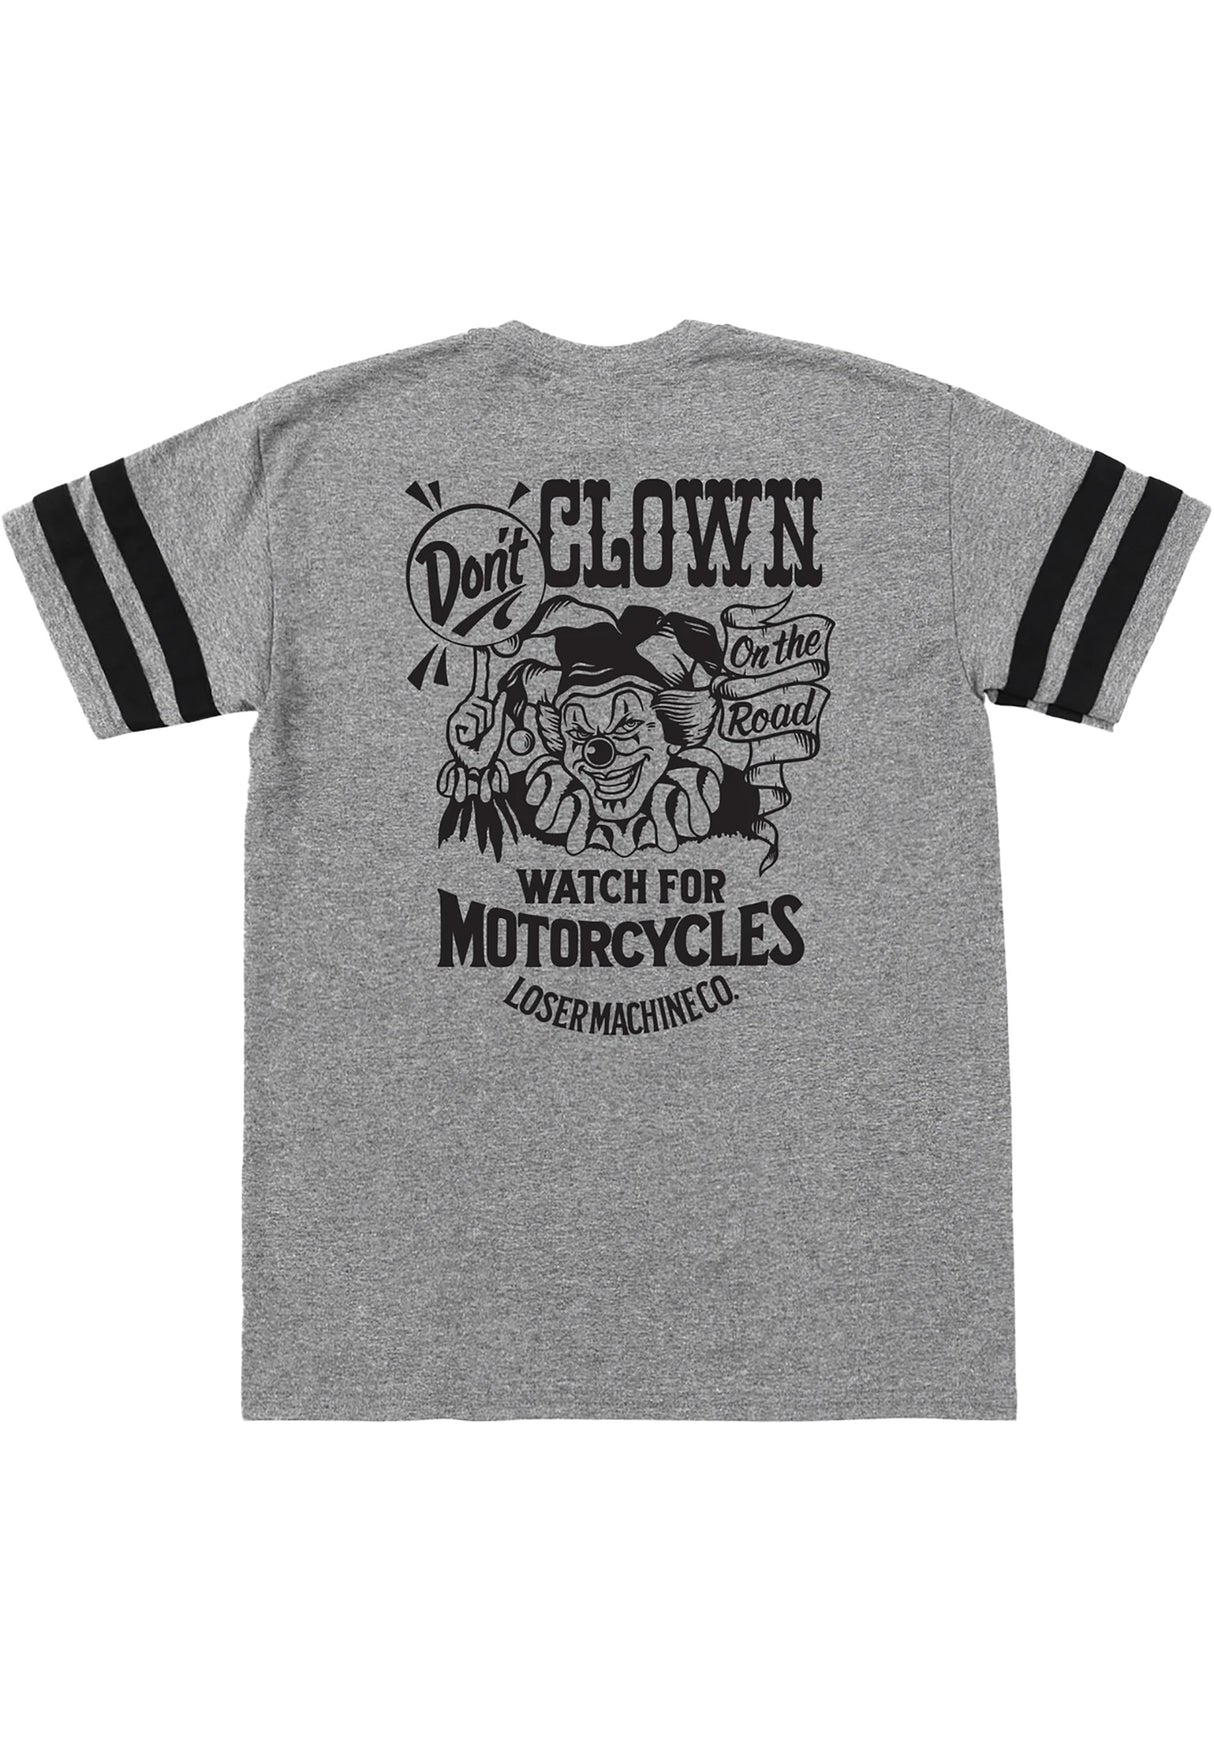 Don't Clown Two Stripe Jersey graphiteheather-black Close-Up2